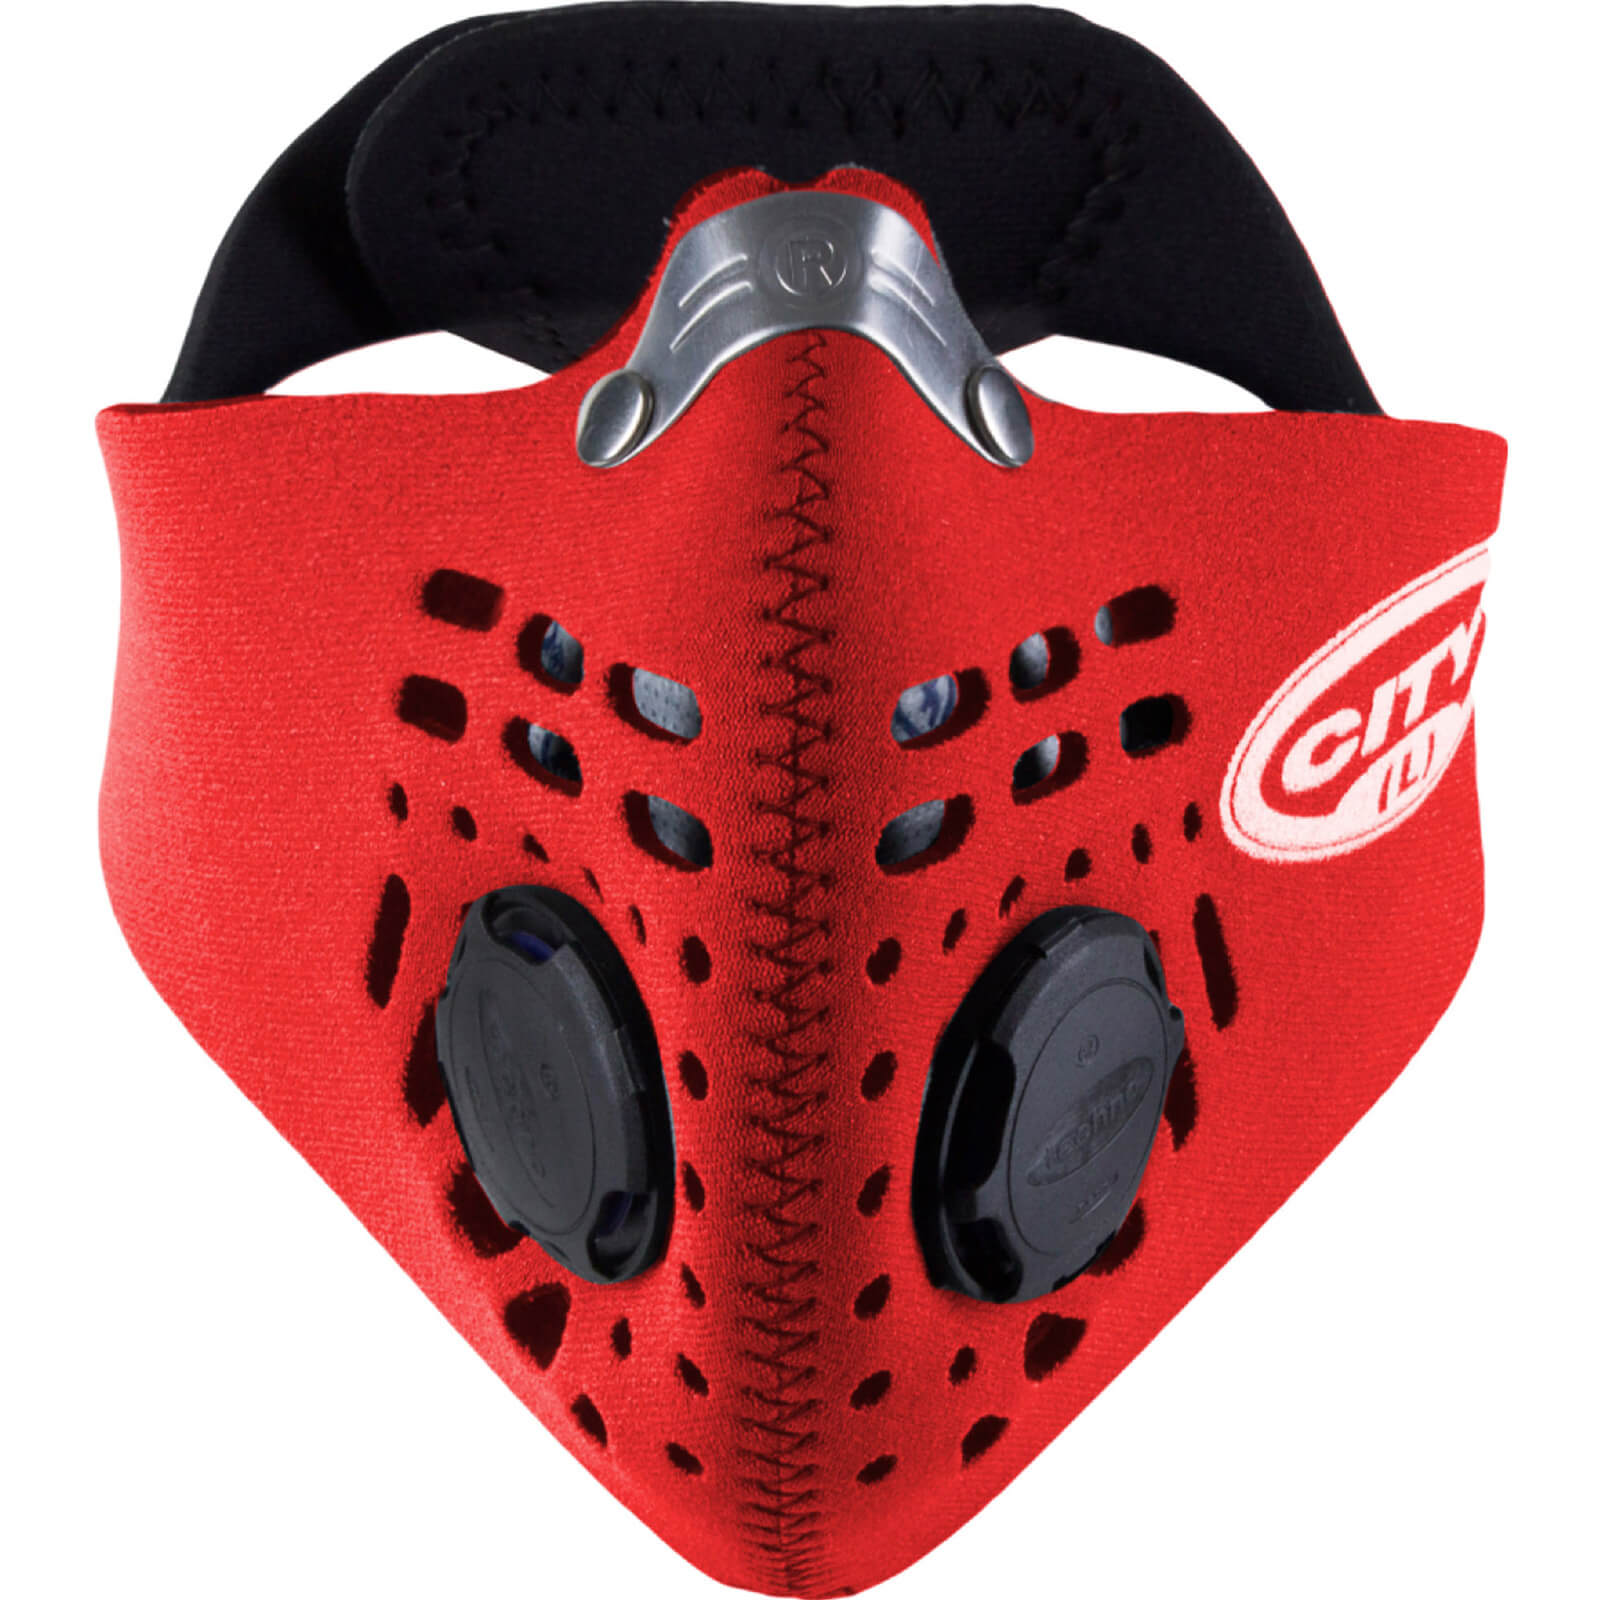 Respro City Mask - M - Red